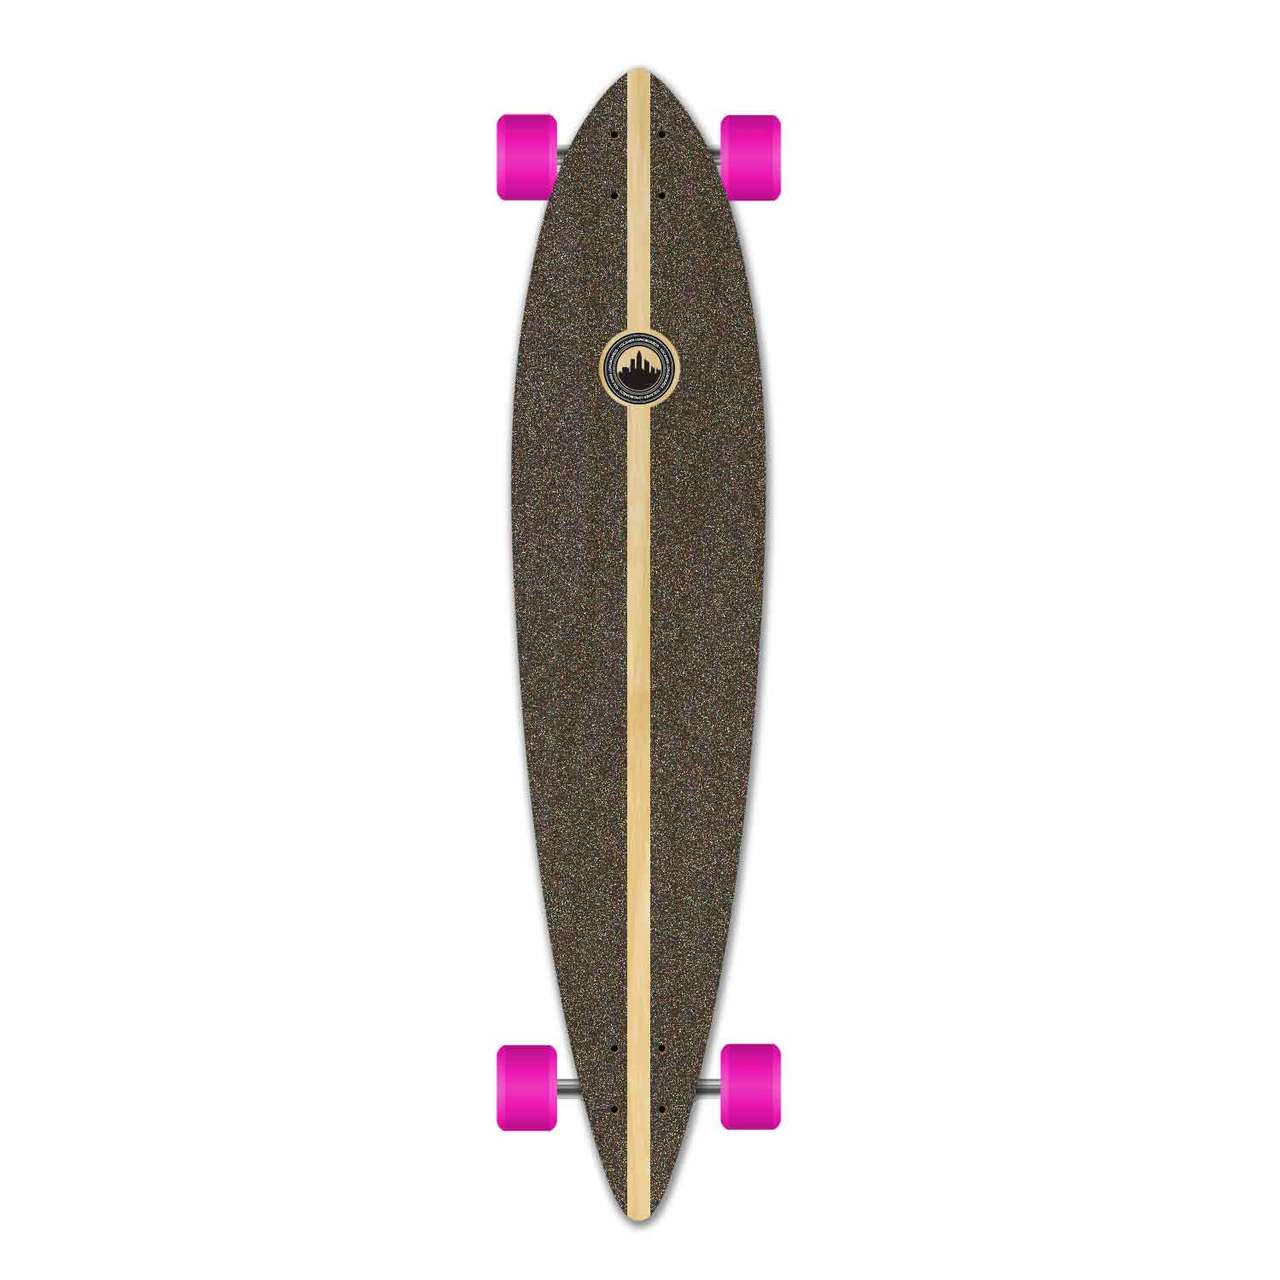 Yocaher Pintail Longboard Complete - The Bird Green